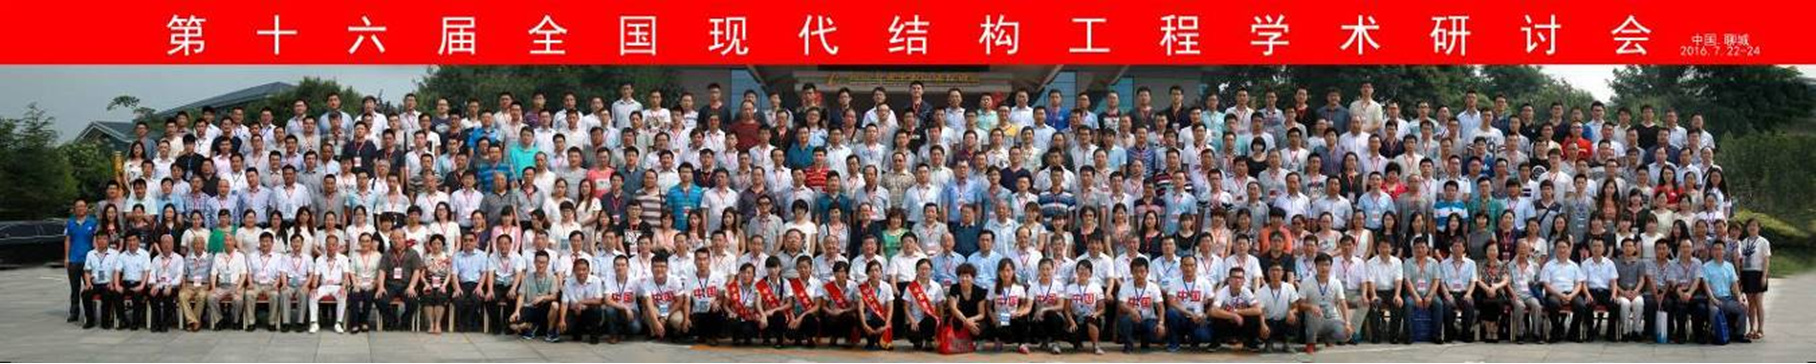 The 16th National Modern Structural Engineering Symposium hosted by Zhongtong Steel Structure was a complete success